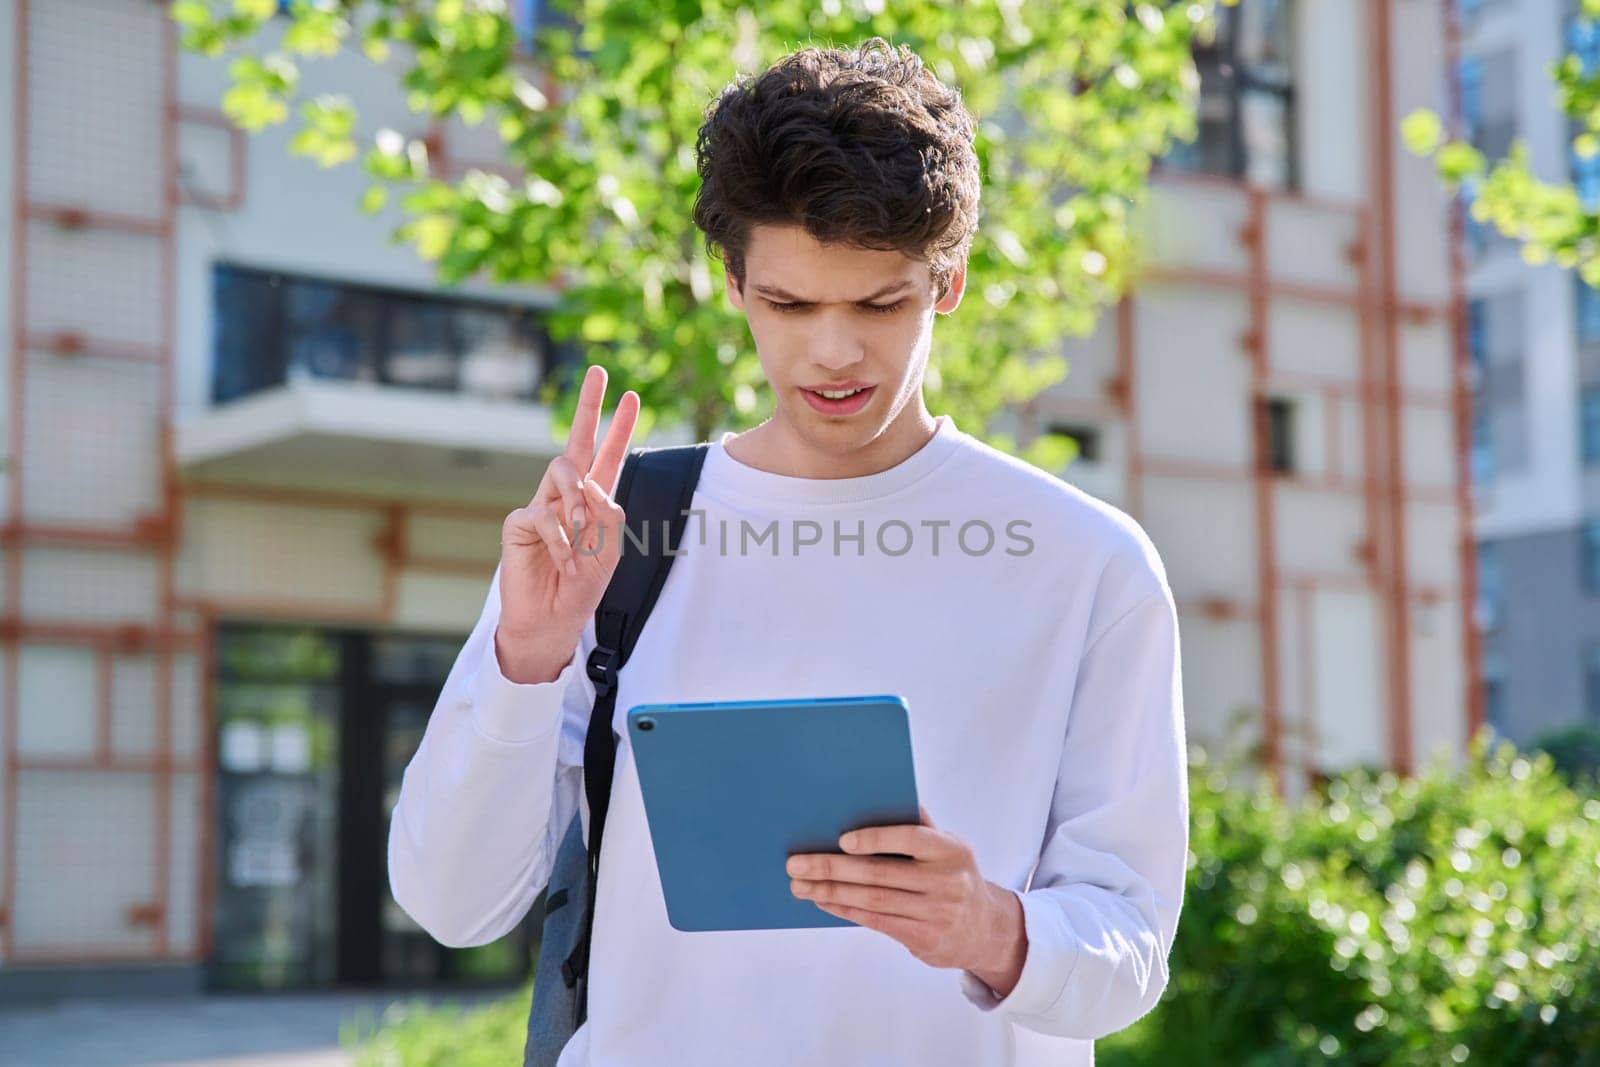 Young handsome guy college student using digital tablet outdoor, talking on video call chat conference, educational building background. Education, technology, training, 19,20 years age youth concept